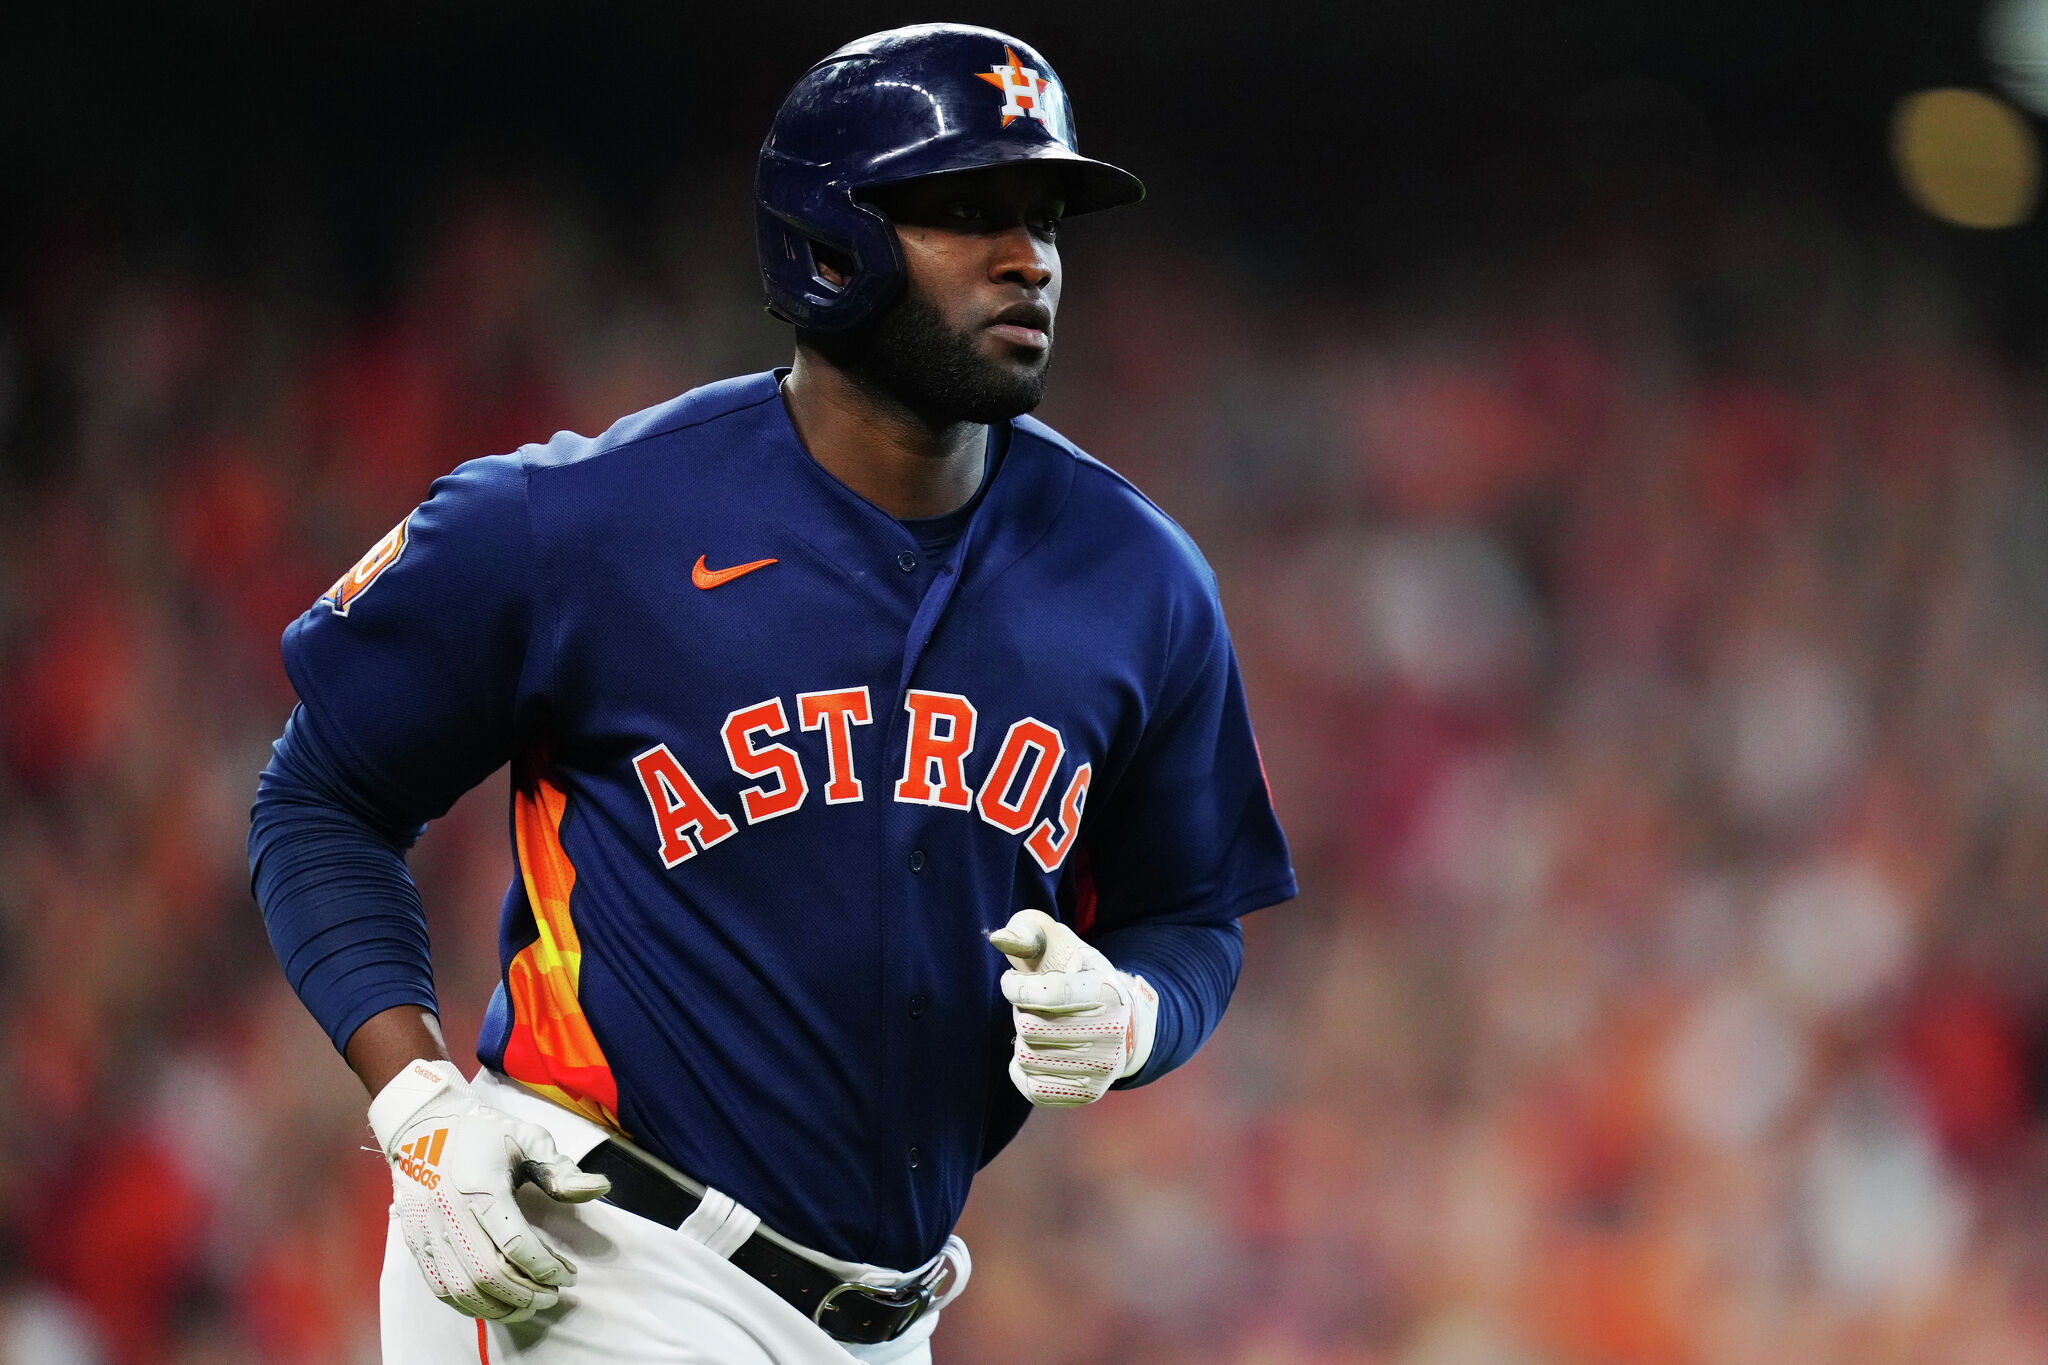 August 10, 2019: Rookie Yordan Alvarez leads Astros' 23-2 onslaught of  Orioles – Society for American Baseball Research